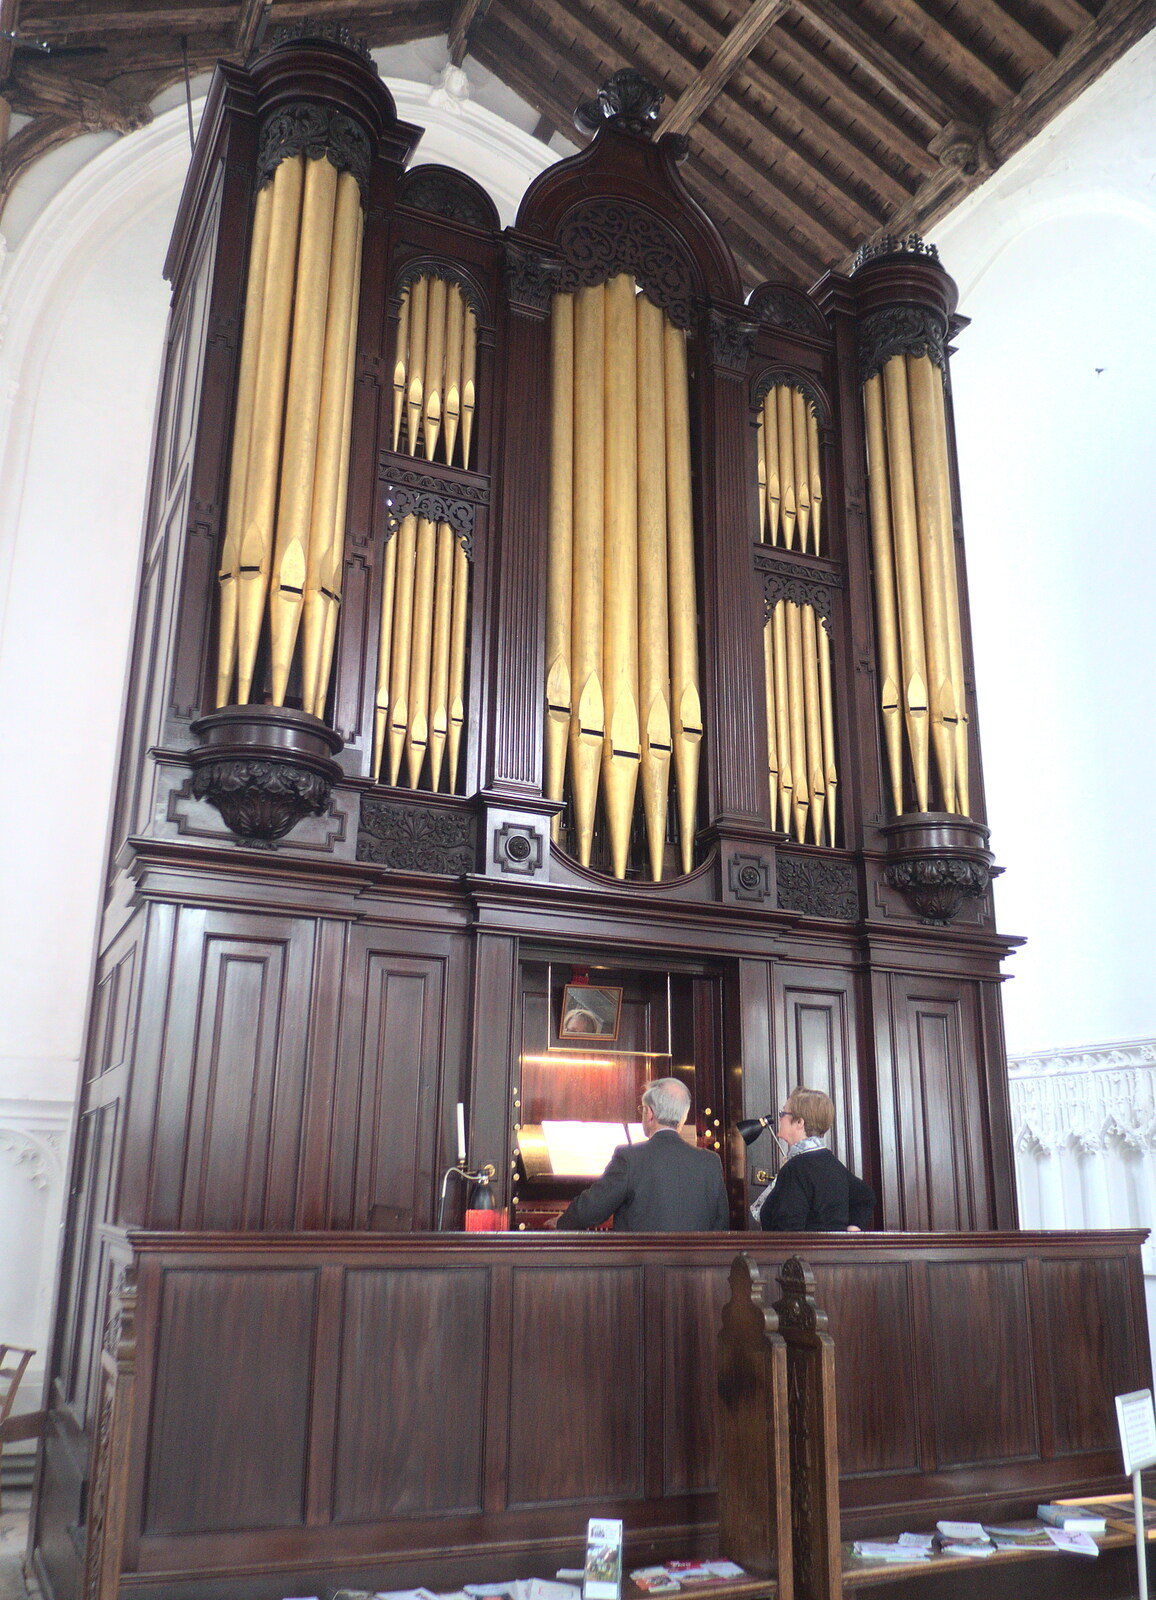 The H. C Lincoln Organ from A Postcard From Thaxted, Essex - 7th May 2017